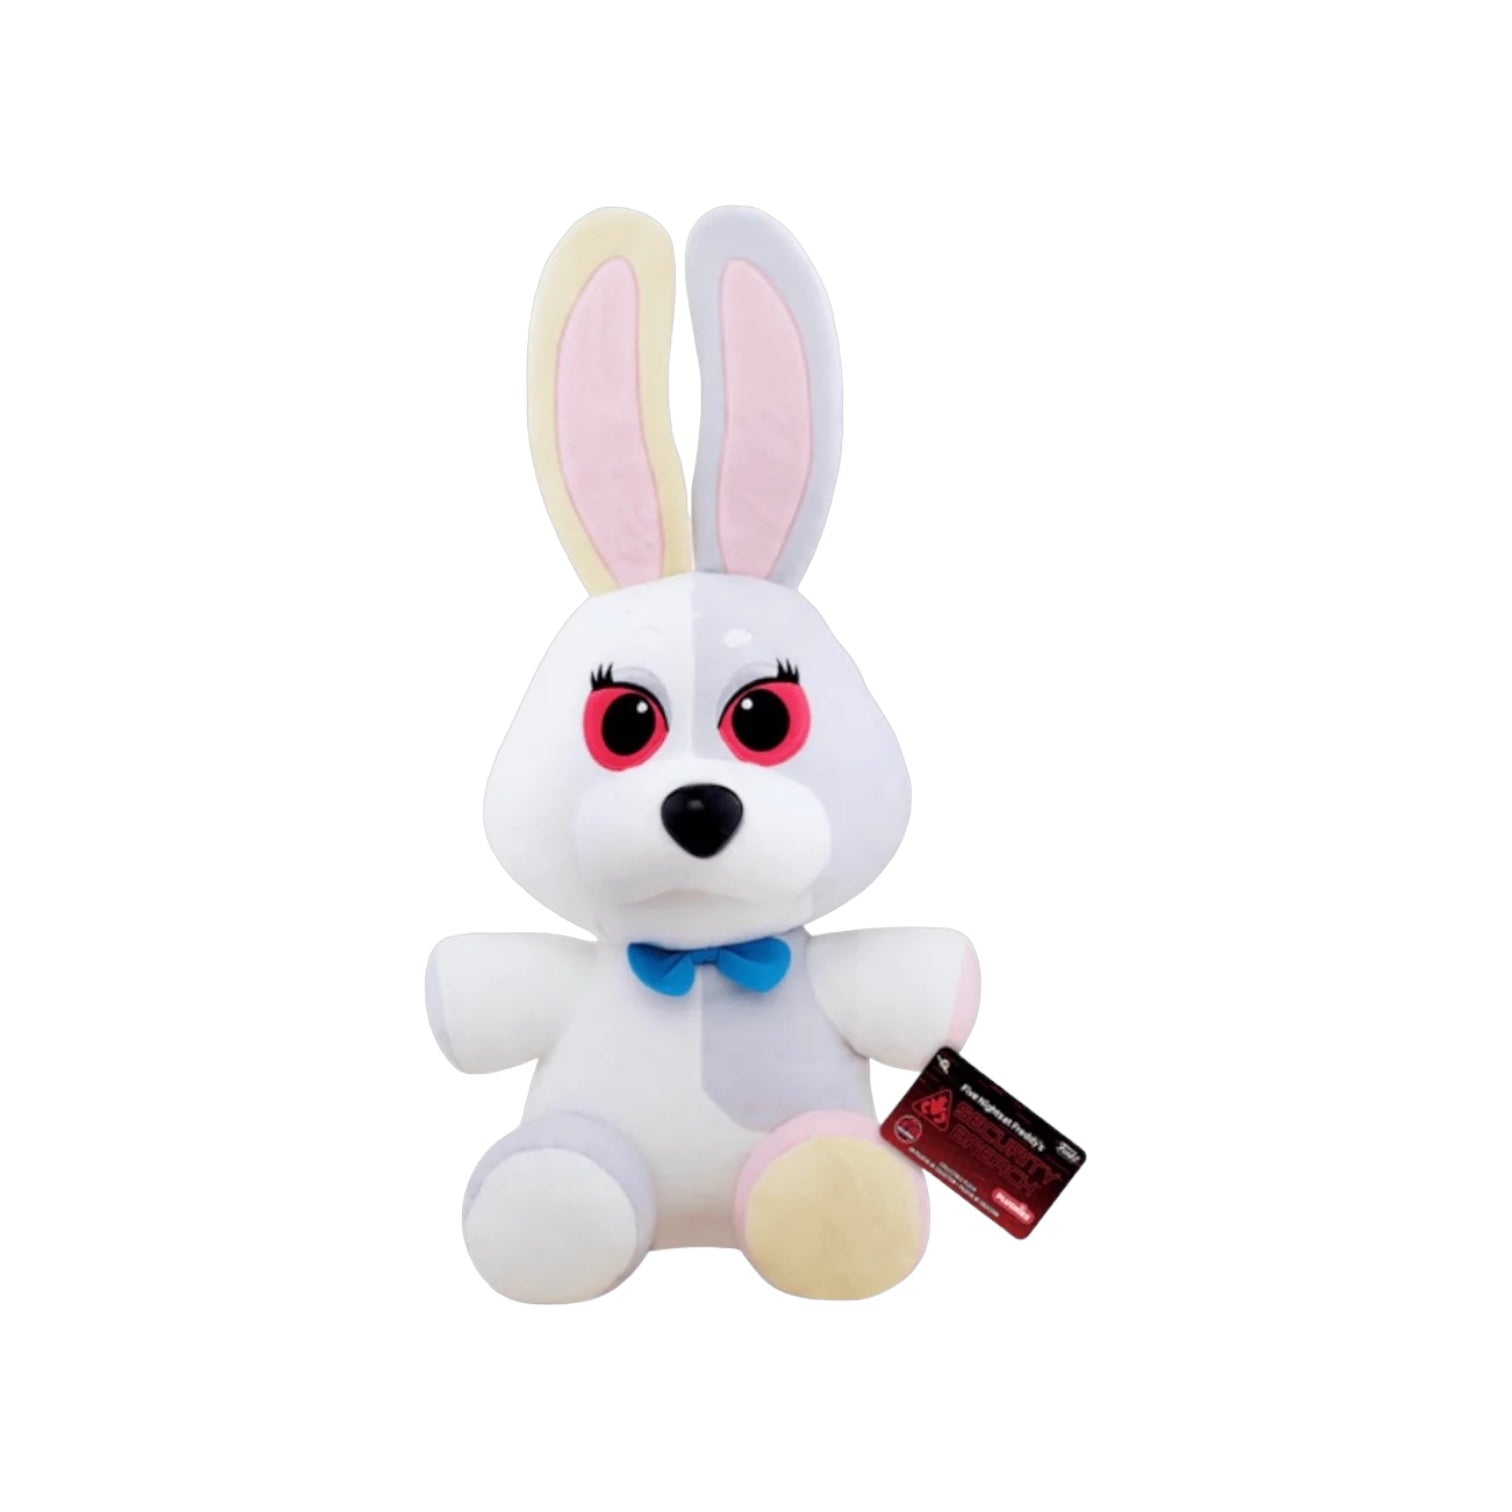 Vanny Funko Plush - Five Nights at Freddy's - Special Edition